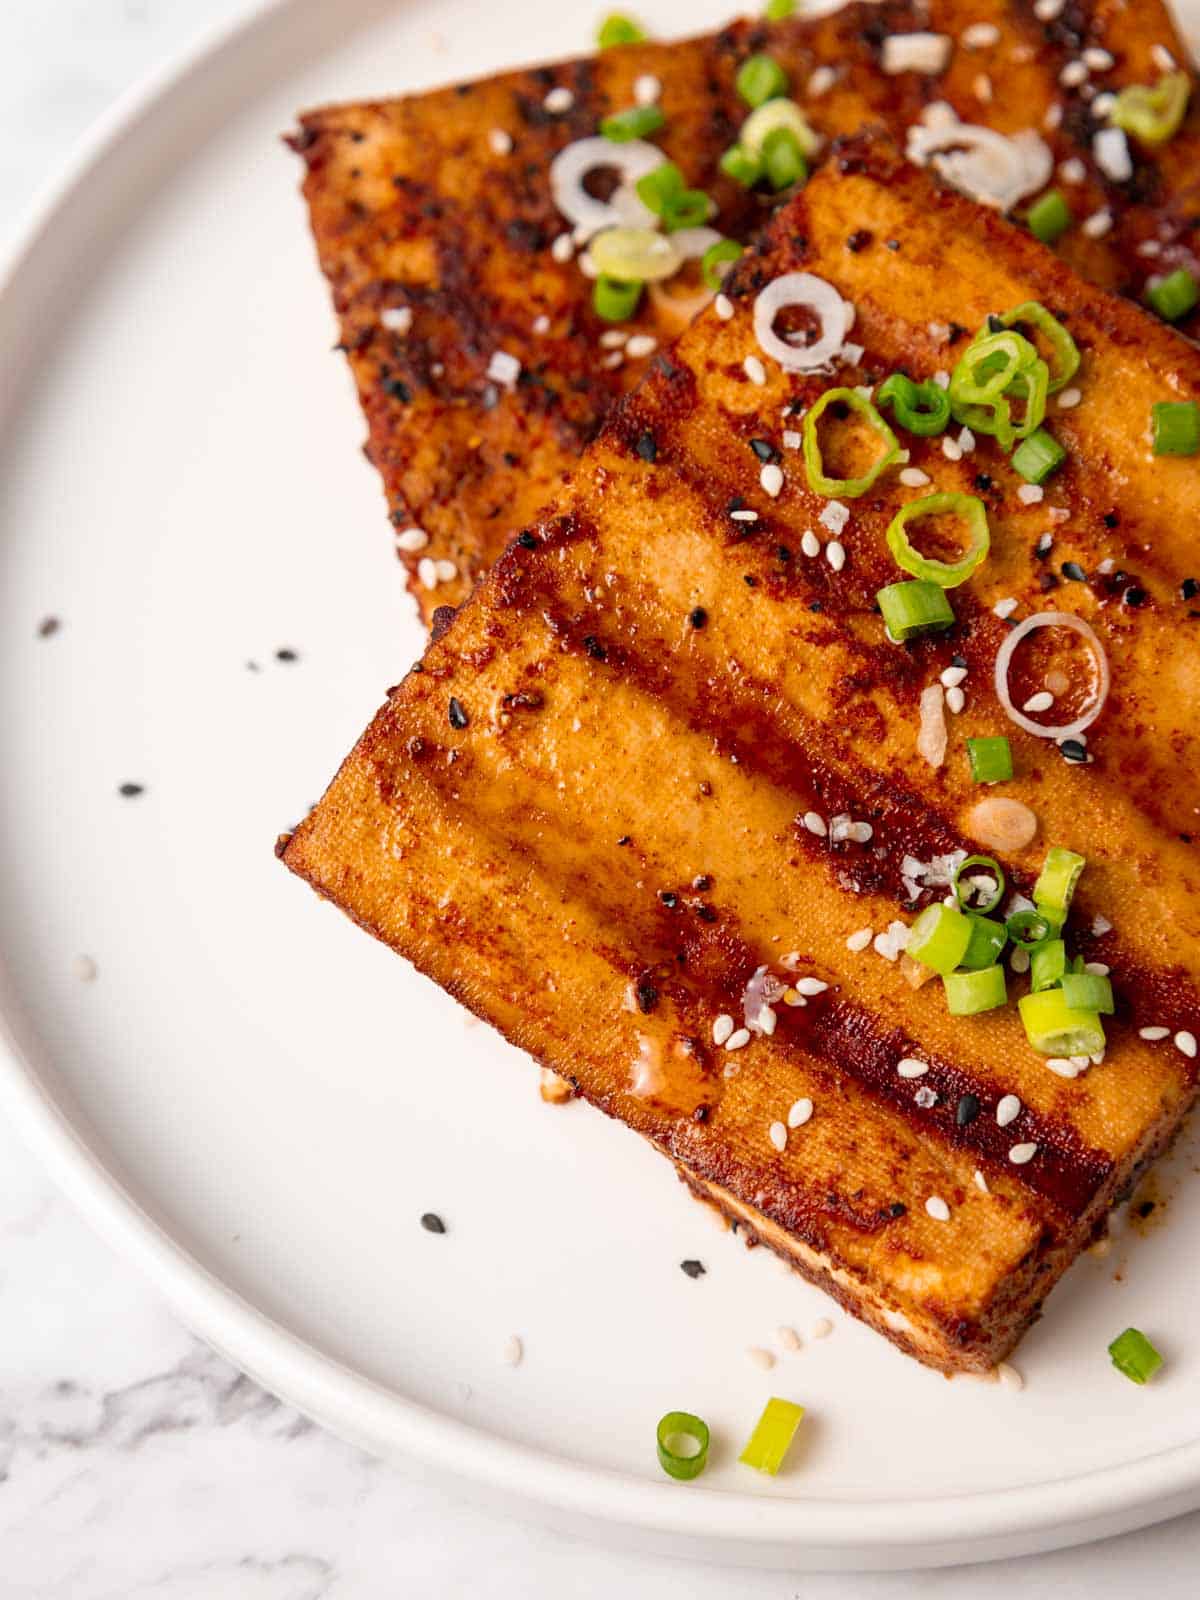 Juicy grilled tofu steaks garnished with scallions and sesame seeds served on a plate.